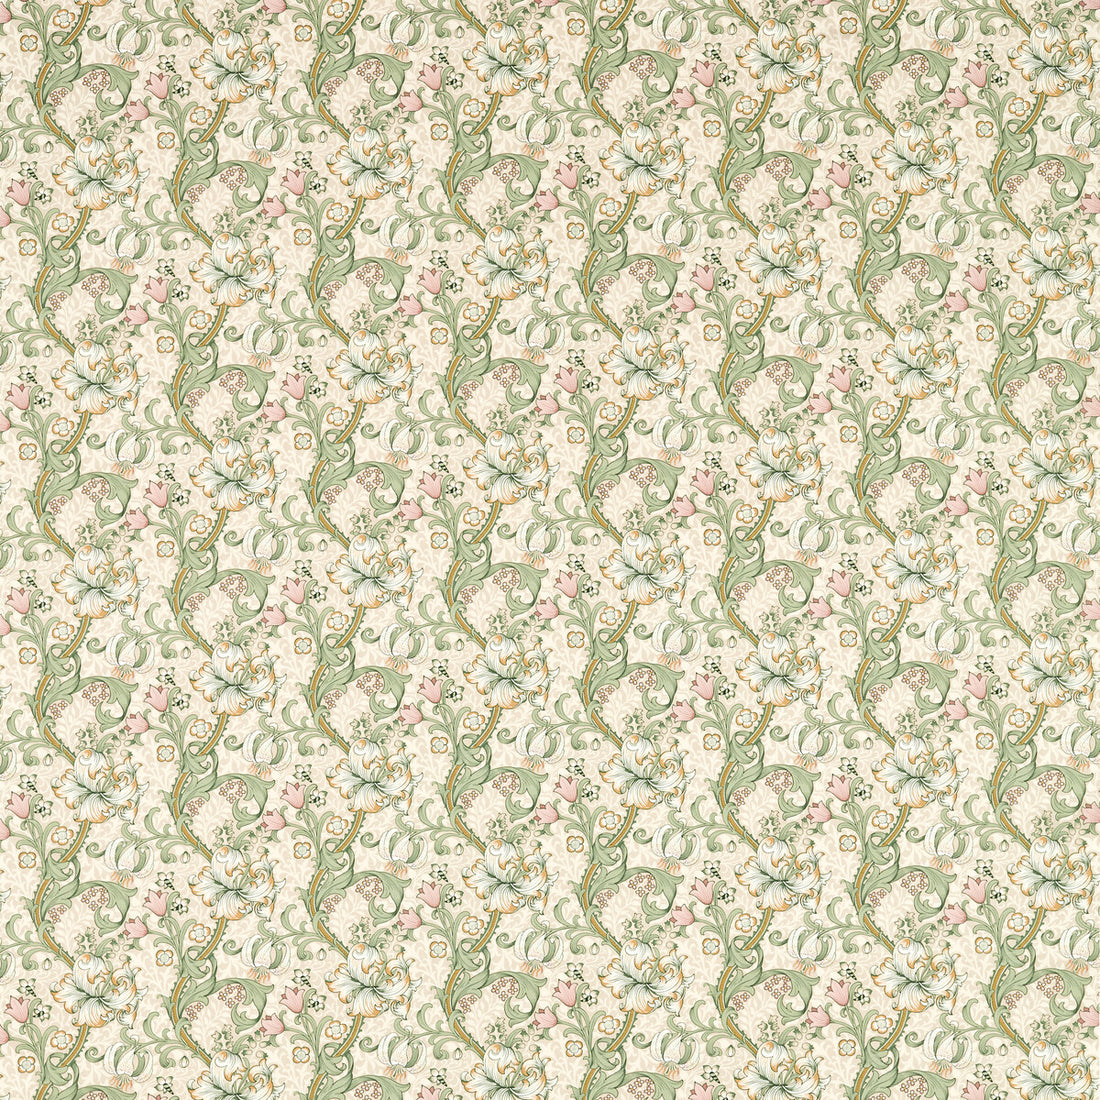 Golden Lily fabric in linen/blush color - pattern F1677/03.CAC.0 - by Clarke And Clarke in the Clarke &amp; Clarke William Morris Designs collection